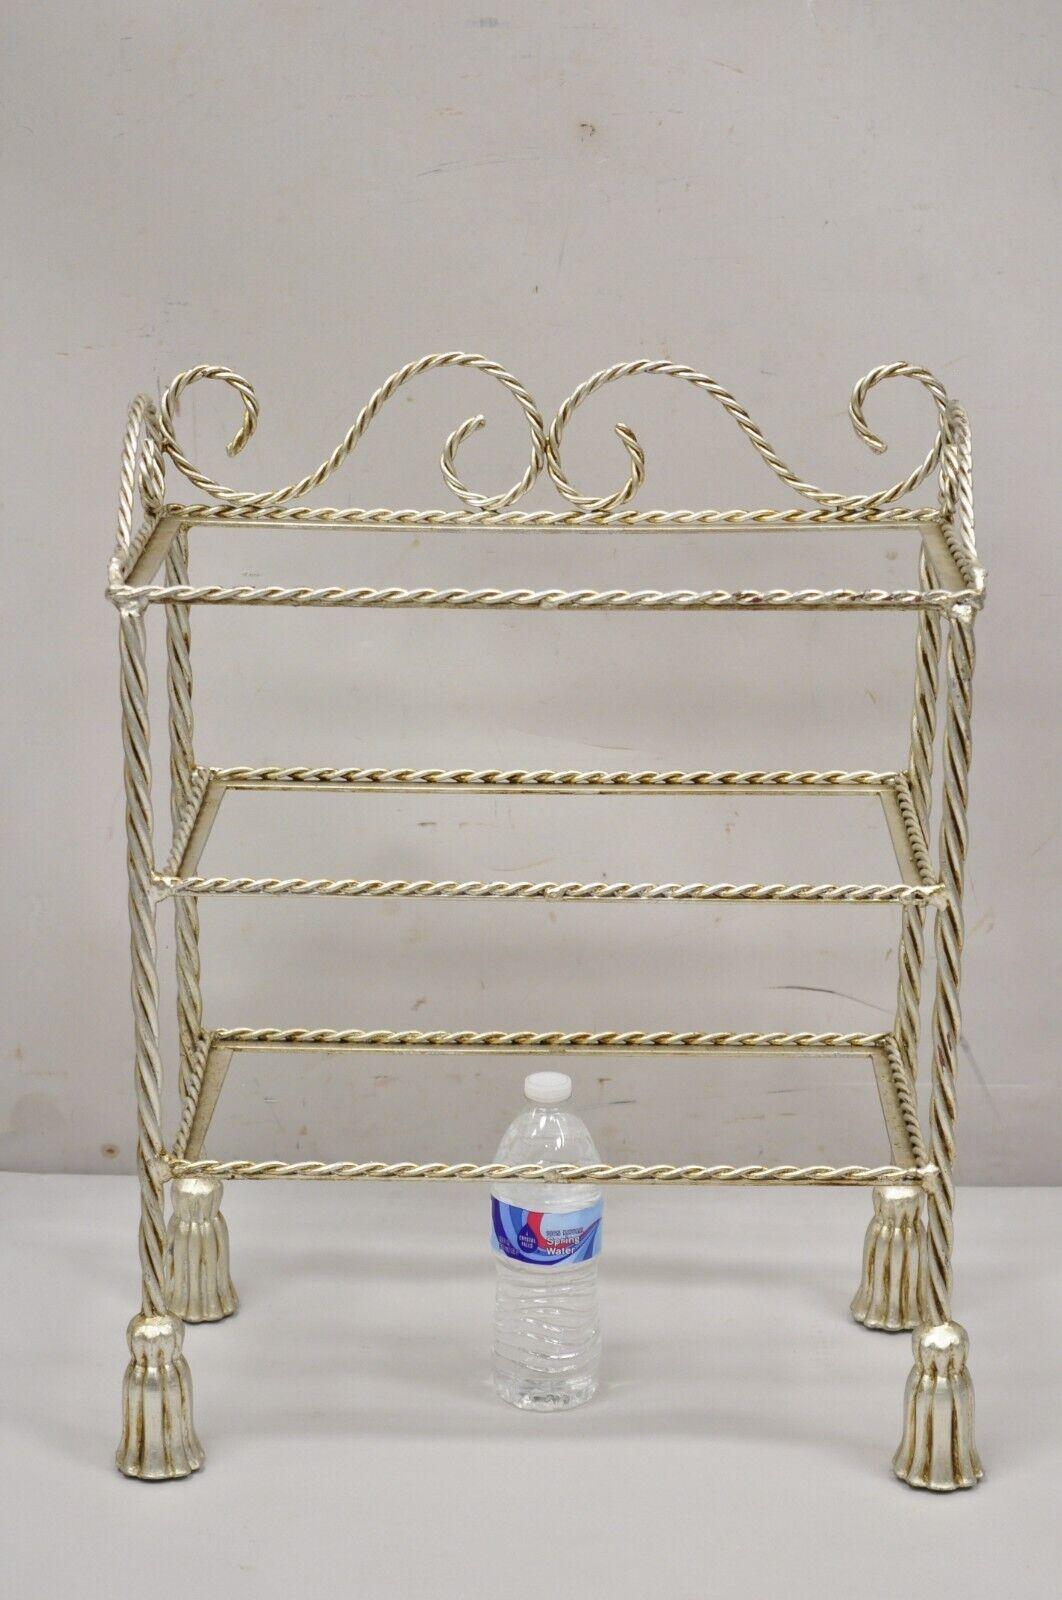 Vintage Italian Hollywood Regency Silver Leaf Gilt Iron 3 Tier Shelf Small Display Stand. Item featured is a nice small size, 3 tiers (no glass for shelves), rope design frame, tassel form feet, quality Italian craftsmanship, great style and form.